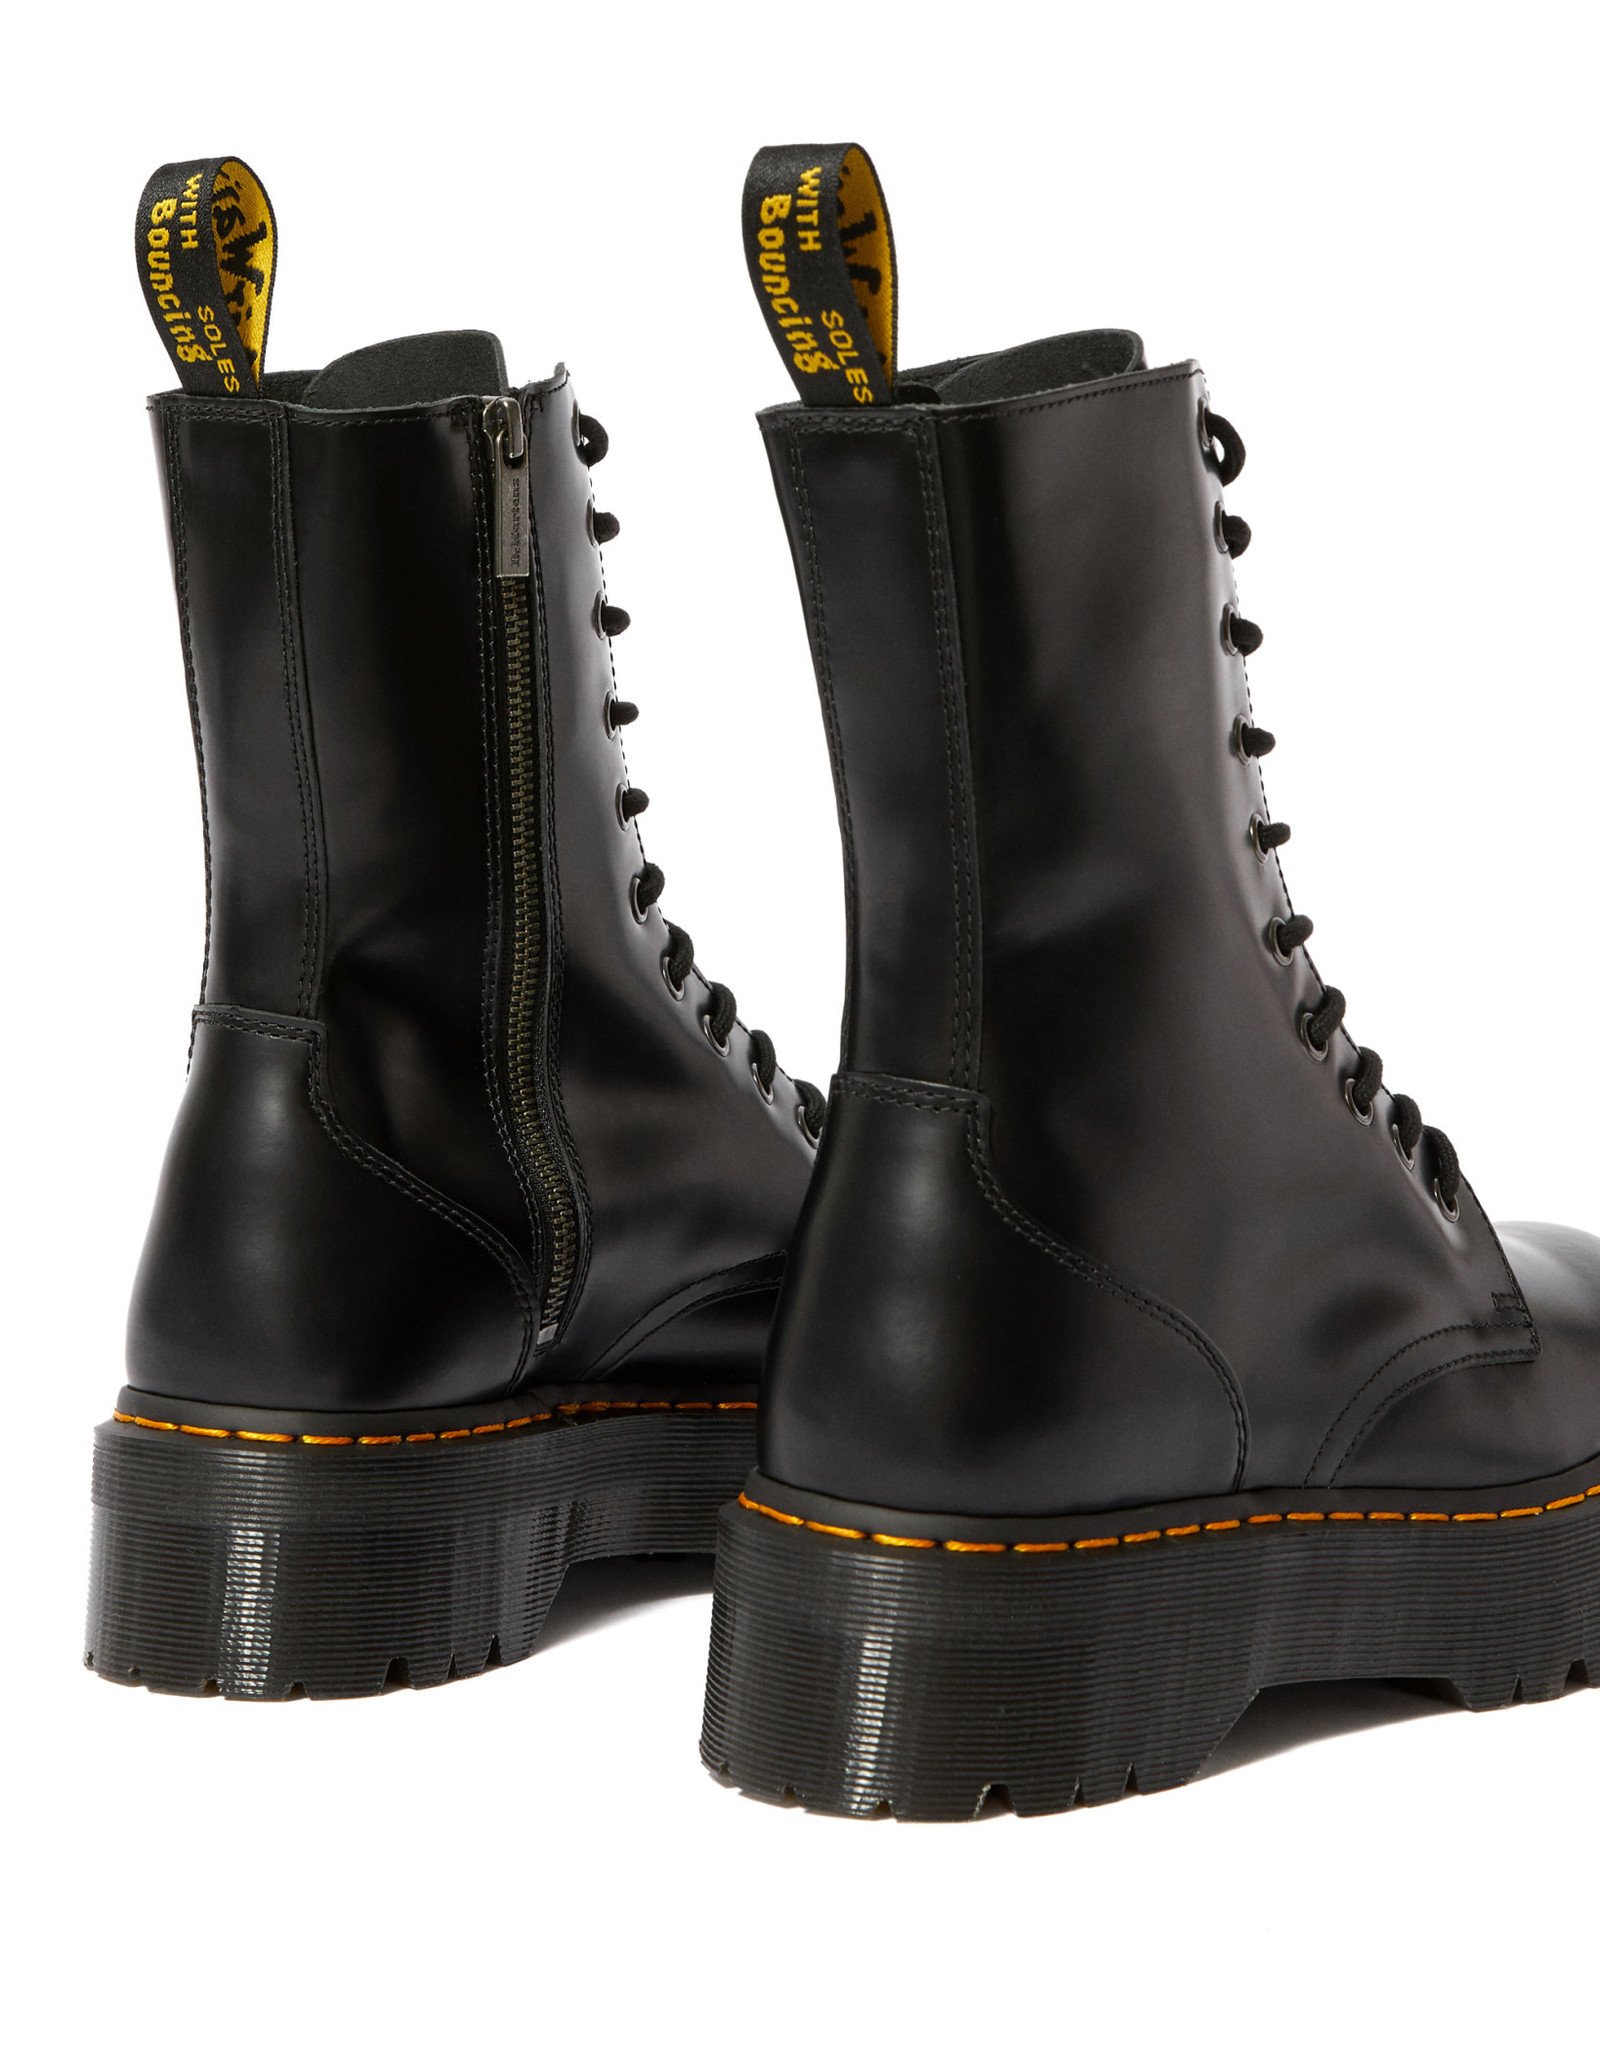 X20 RIO Montreal Dr Martens Canada, footwear Boots4all - Boutique